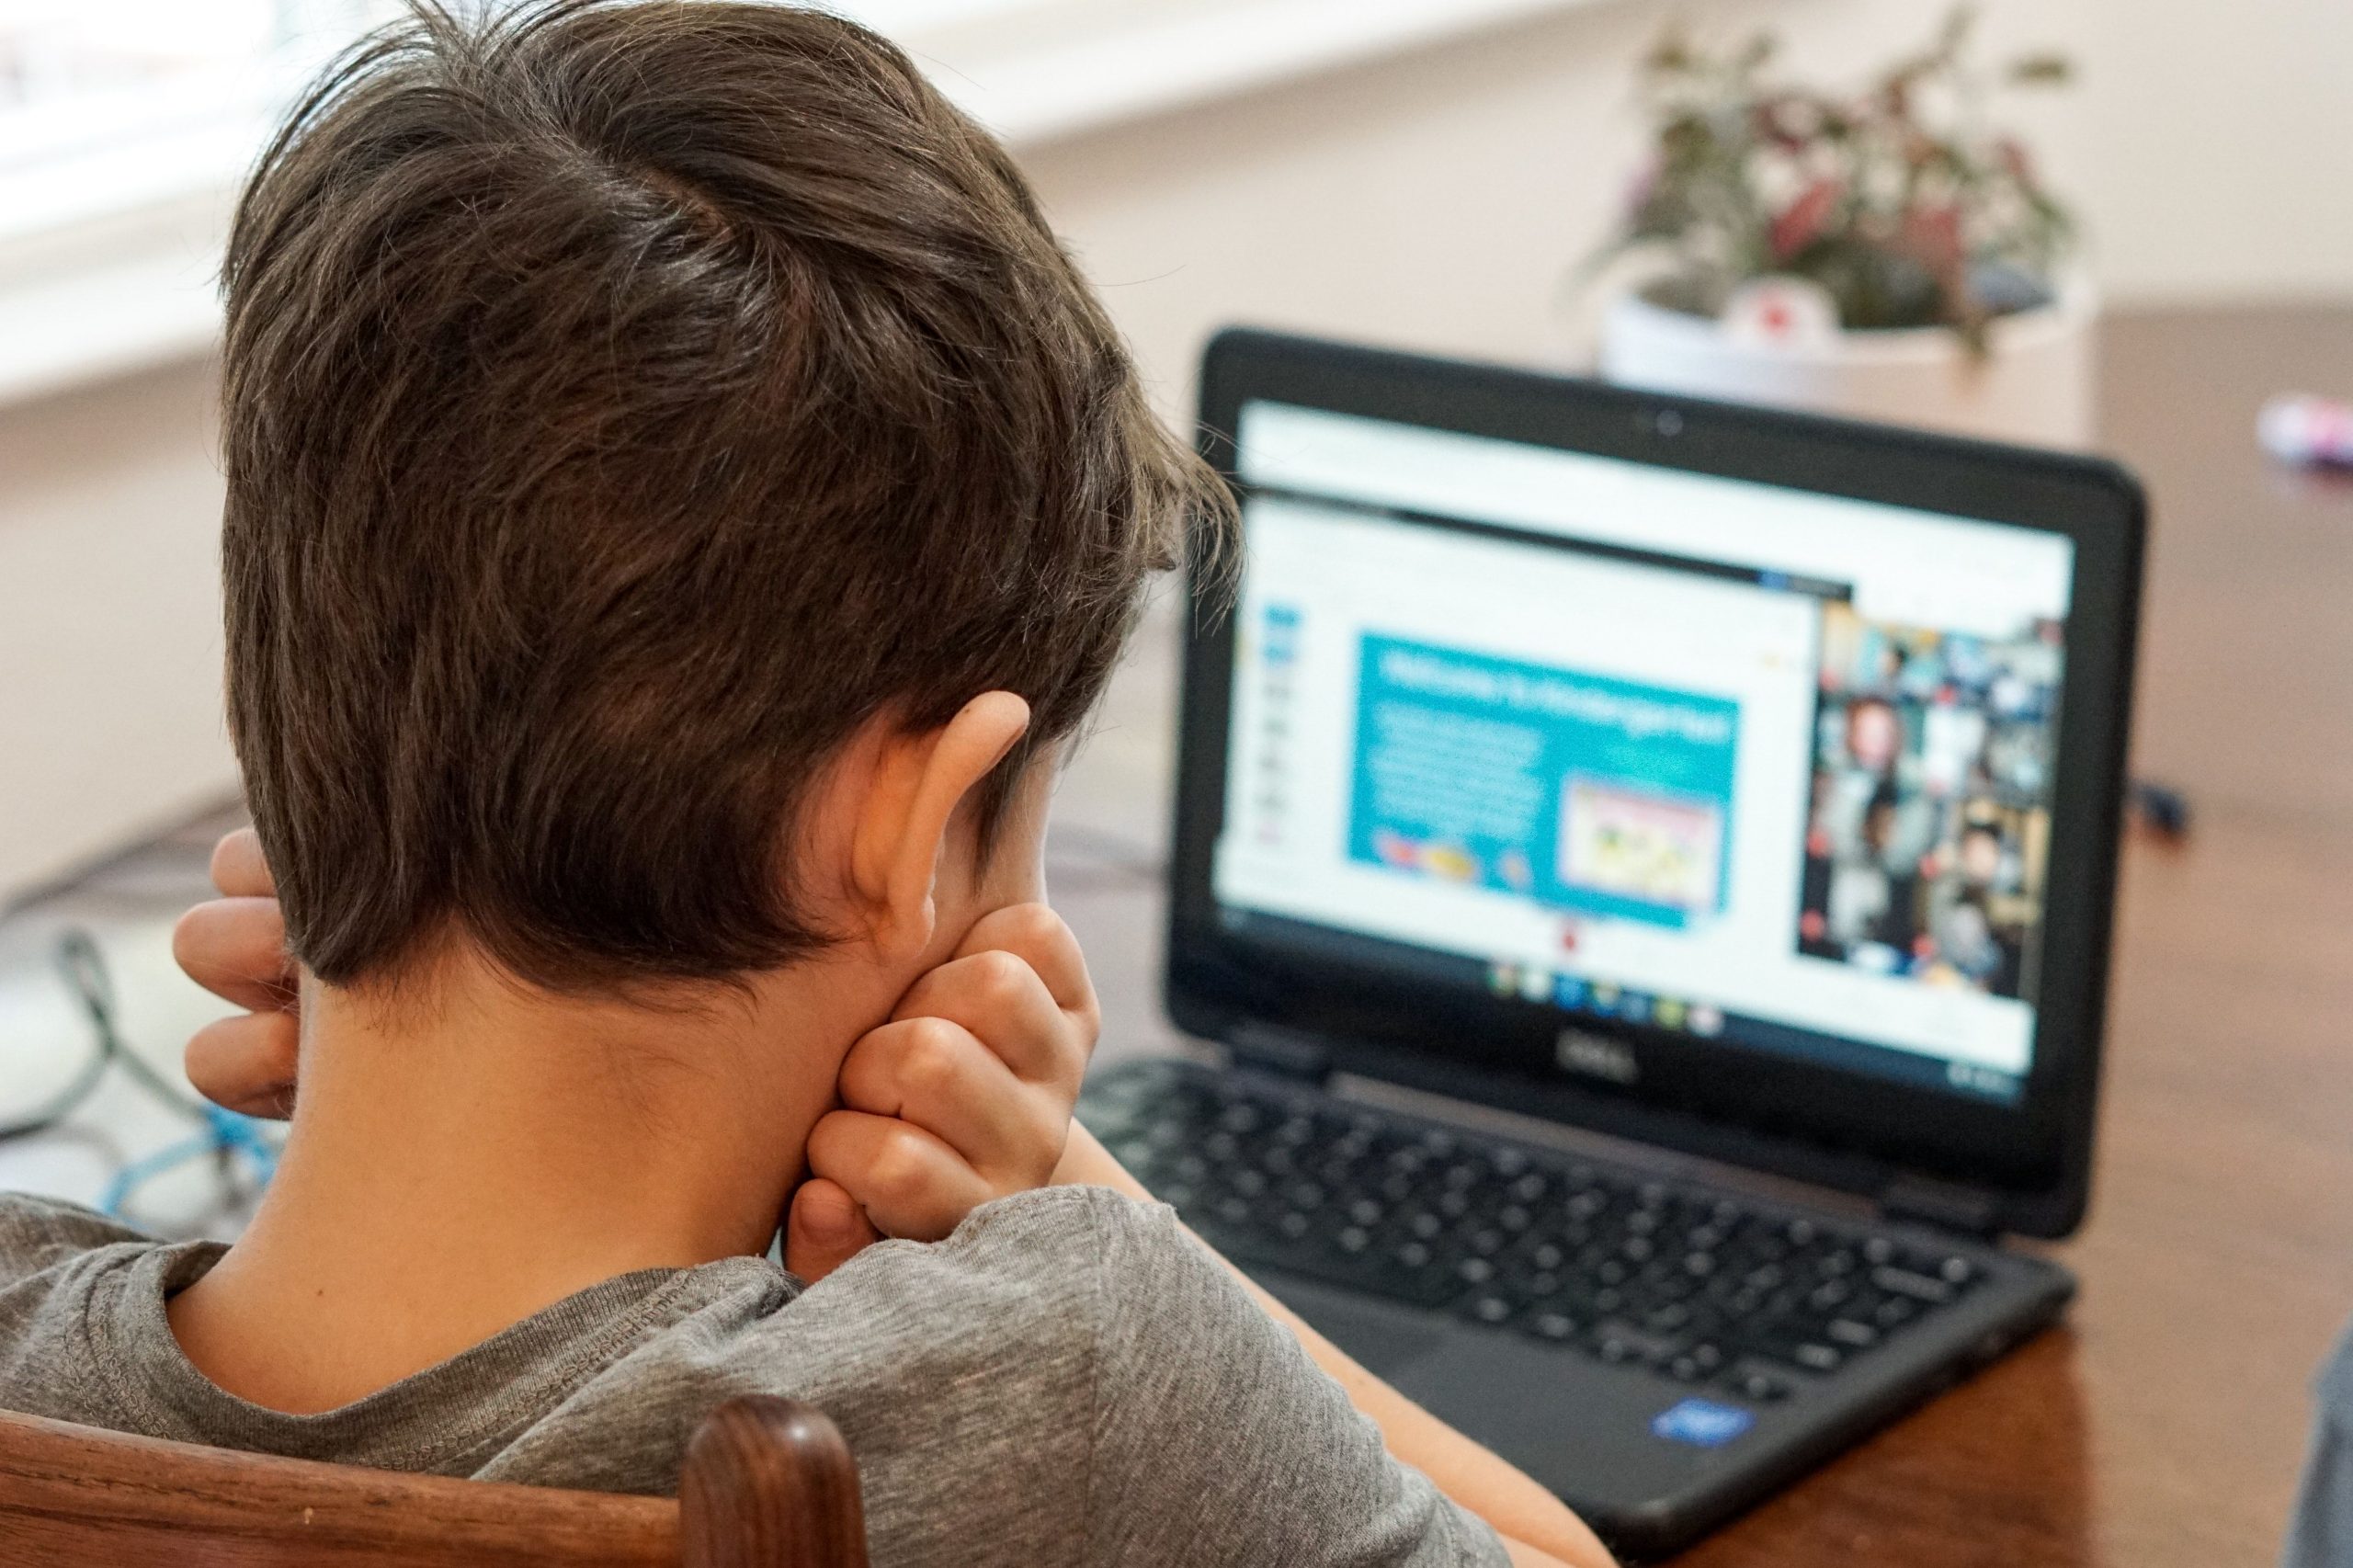 Indian parents support monitoring child’s online activity, report reveals